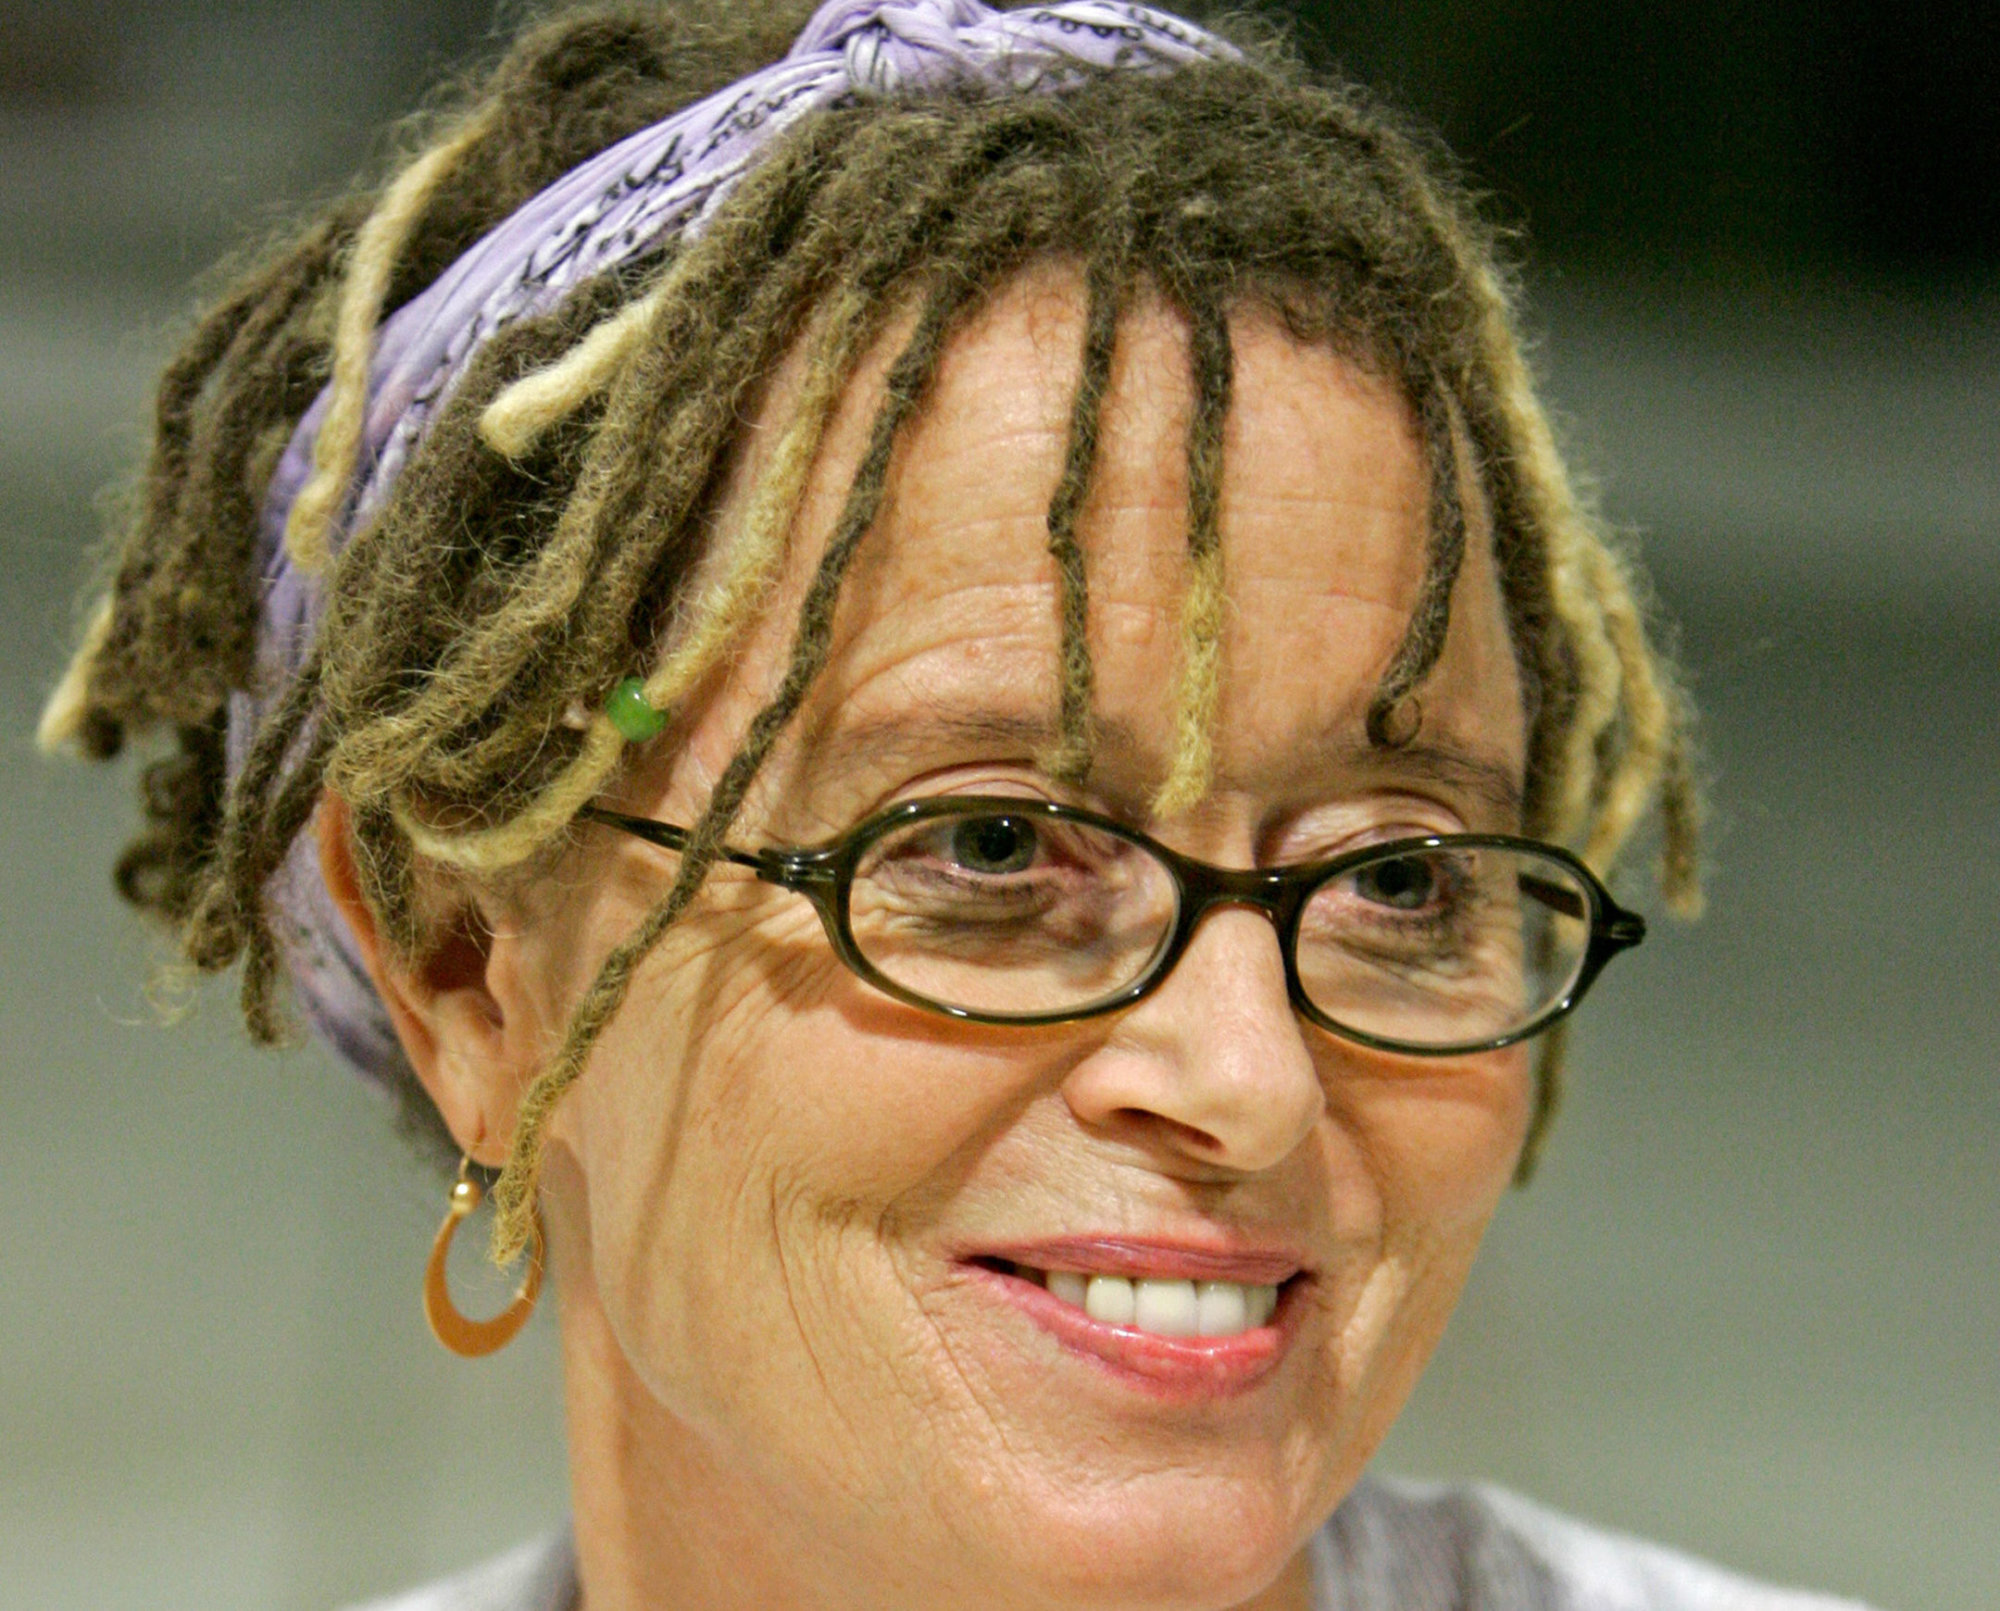 Need hope? Anne Lamott ditches despair, redirects focus in new book